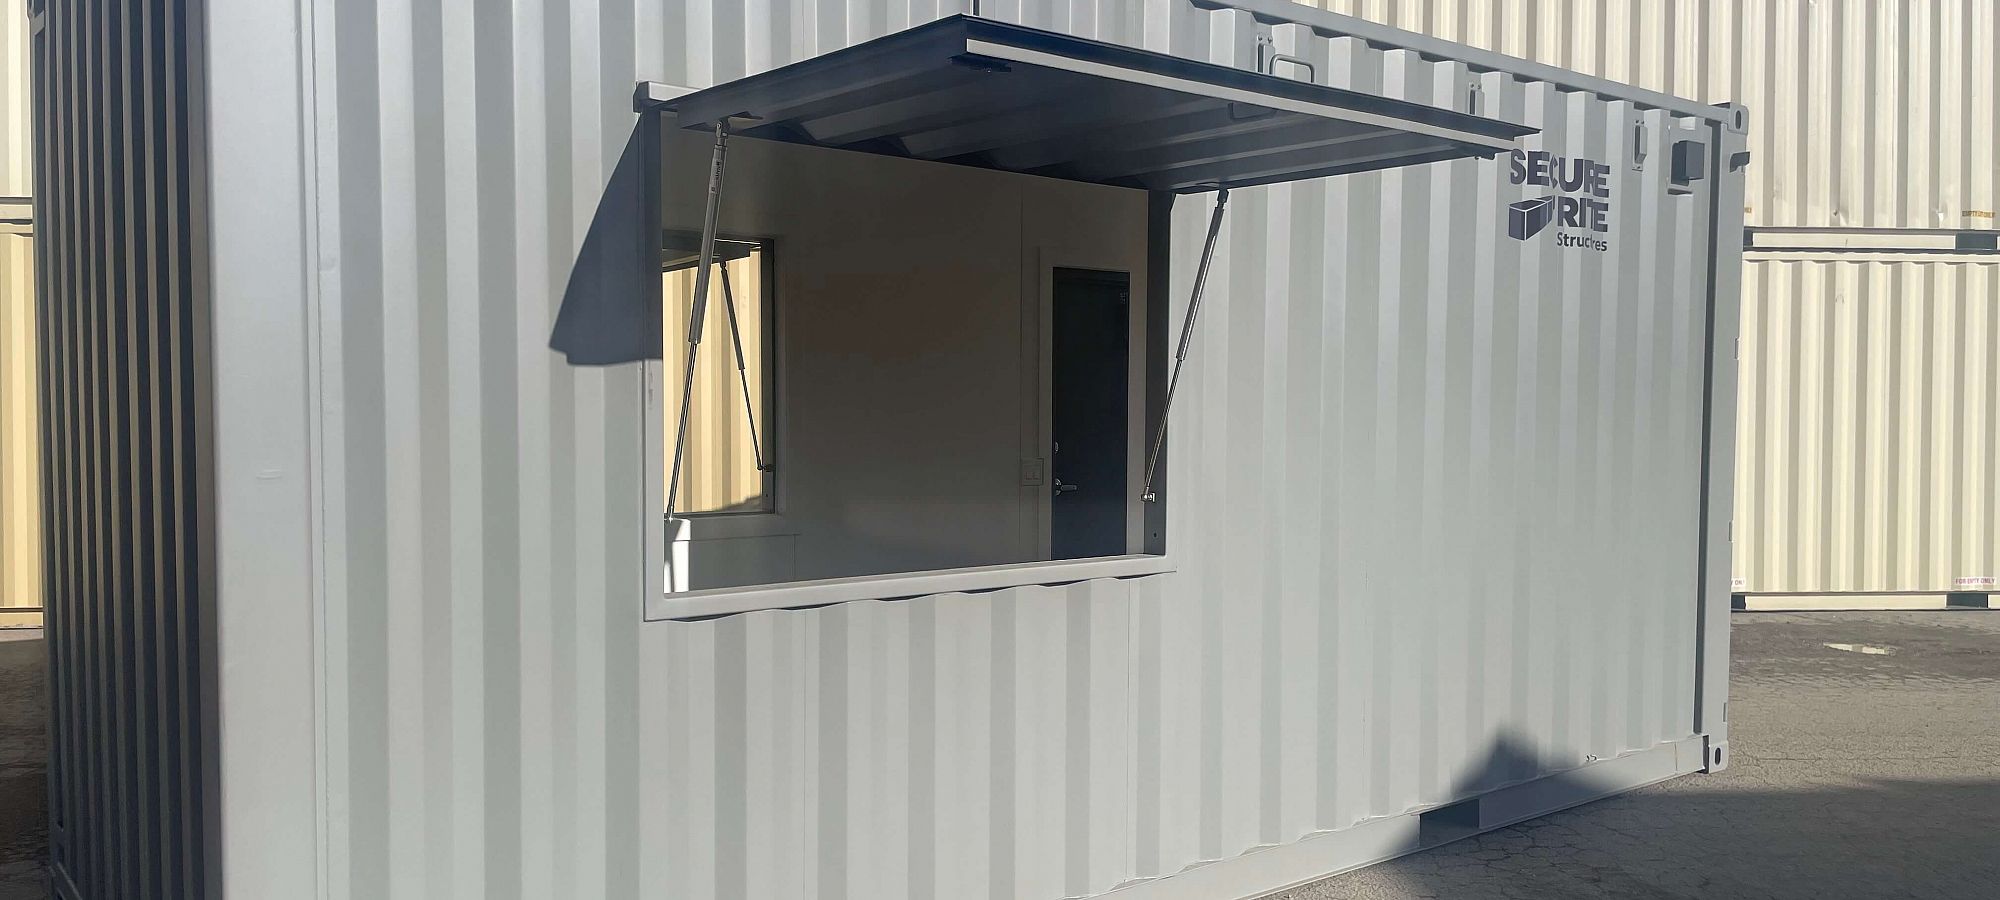 The Compact Genius of a Shipping Container Booth for Ticketing, Events and More!